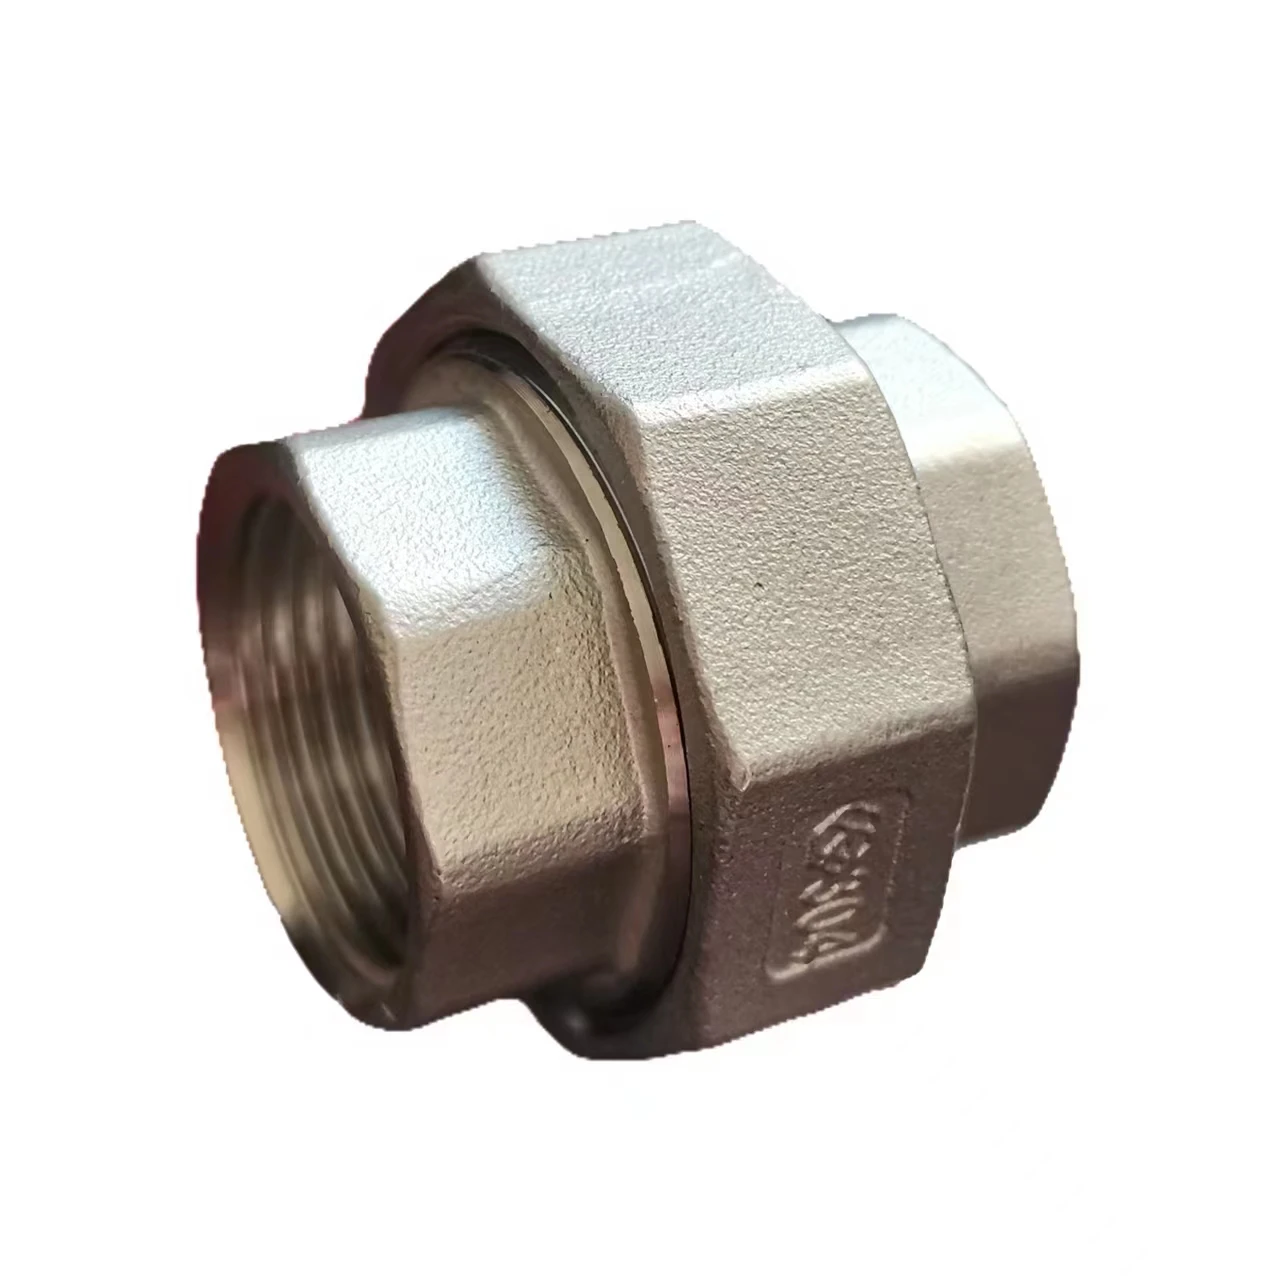 304/316 stainless steel screwed fittings- union